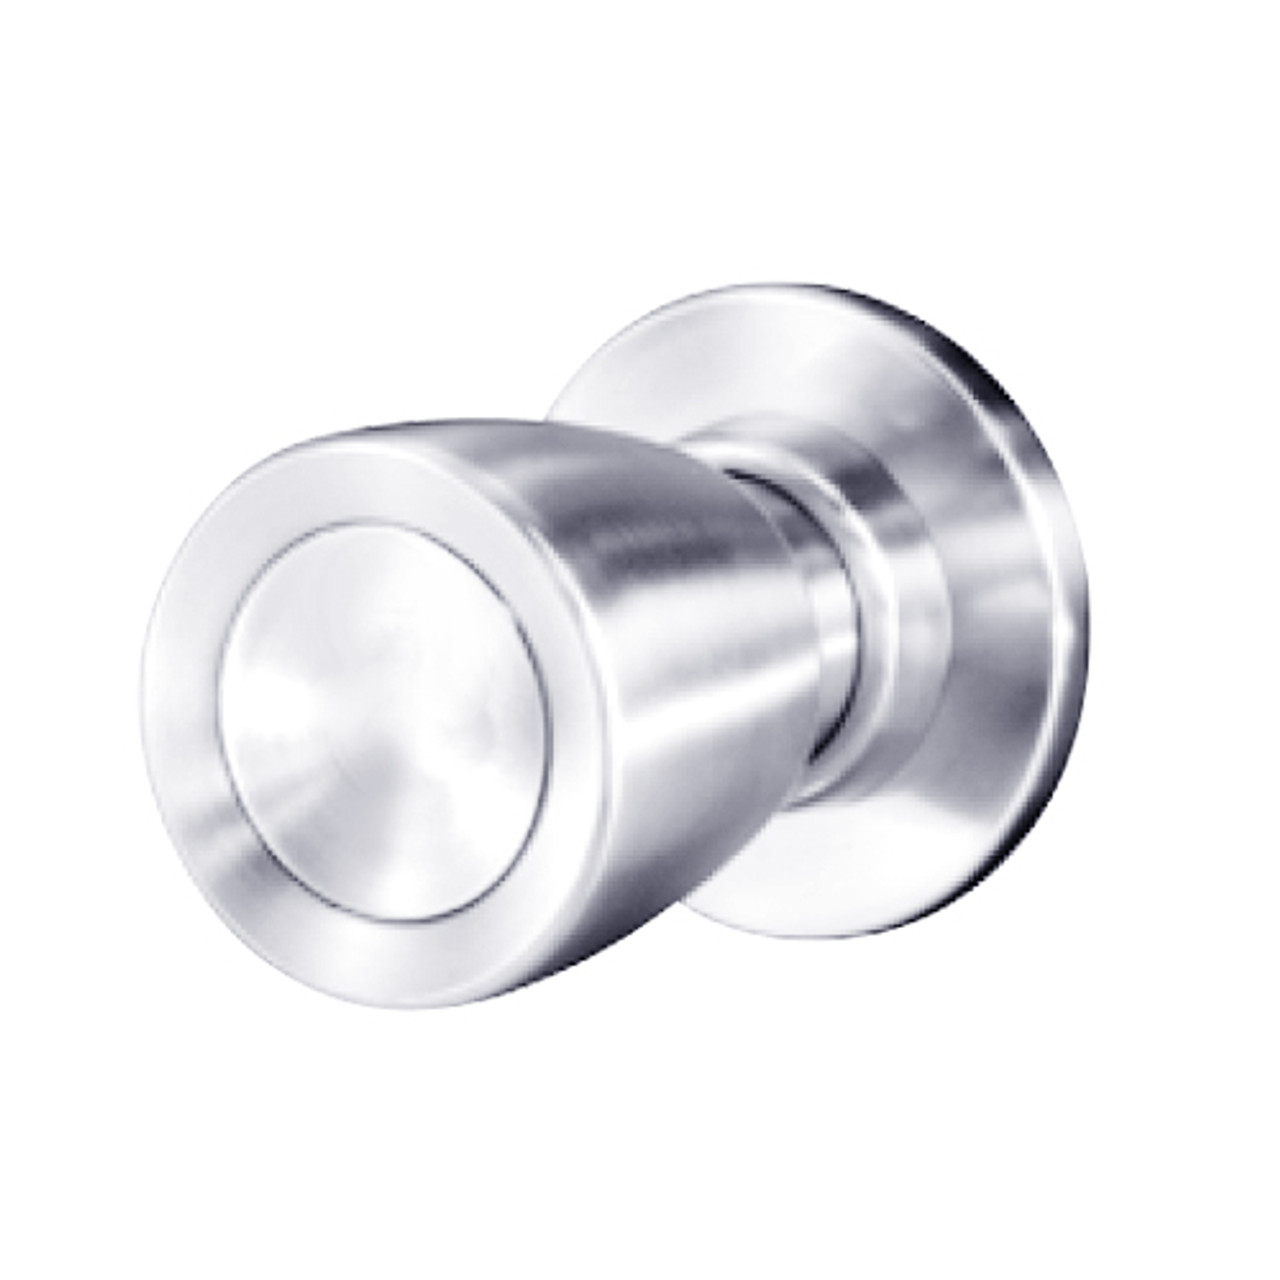 8K30Q6CSTK625 Best 8K Series Exit Heavy Duty Cylindrical Knob Locks with Tulip Style in Bright Chrome